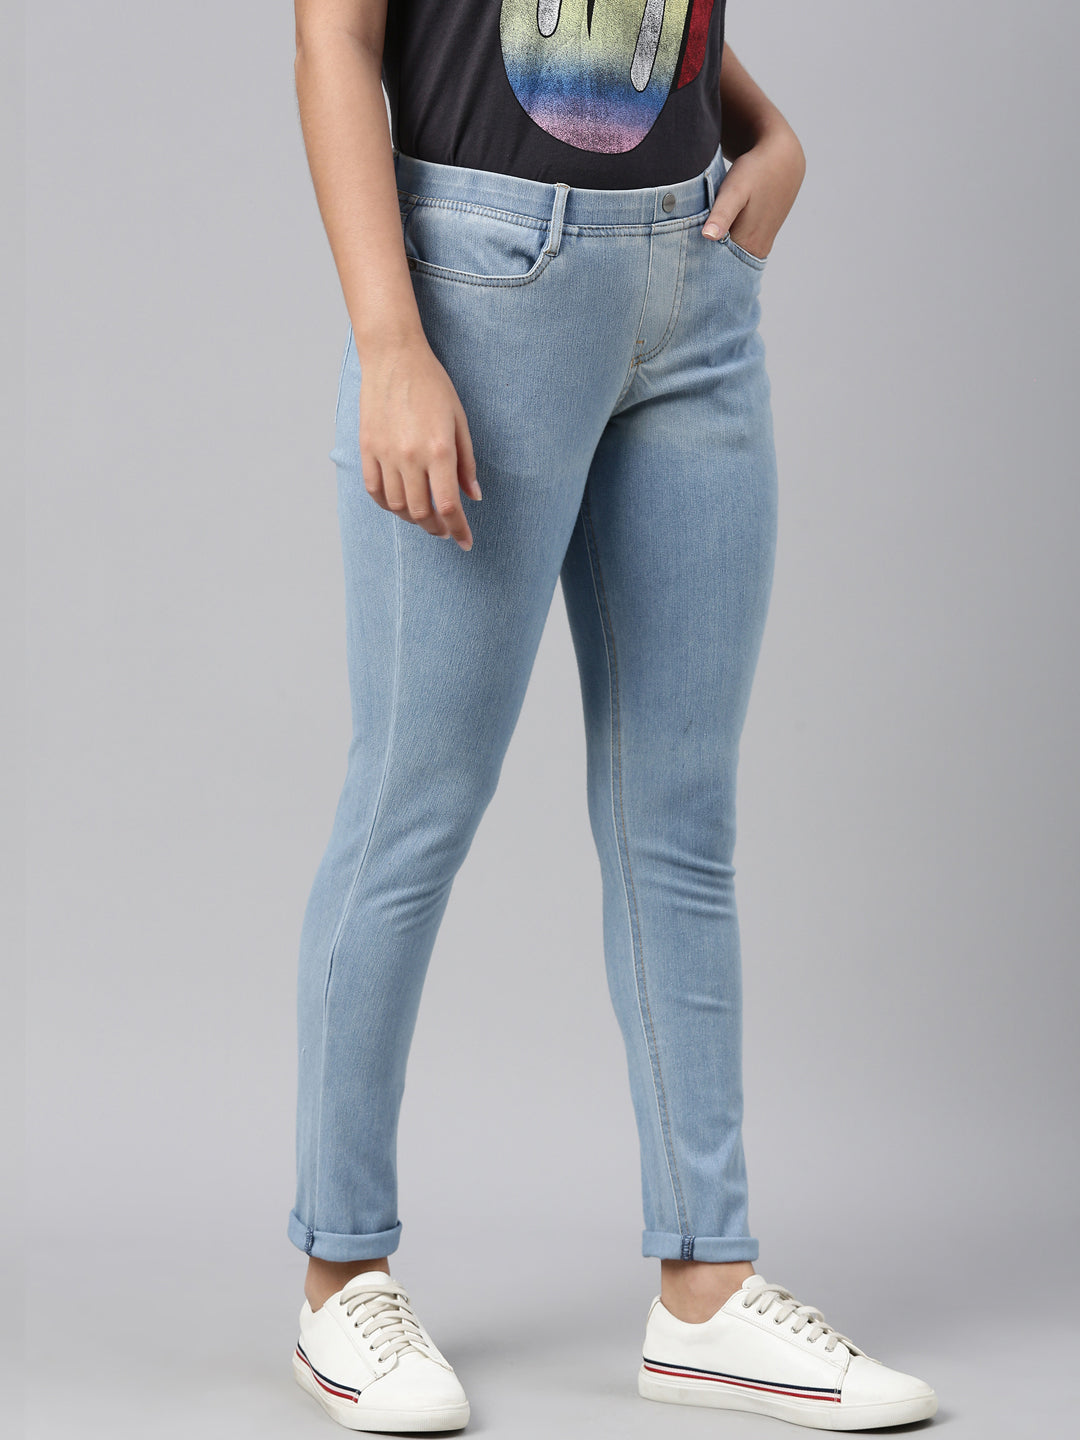 Buy Black Denim Jeans Jeggings For Women Online In India At Discounted  Prices